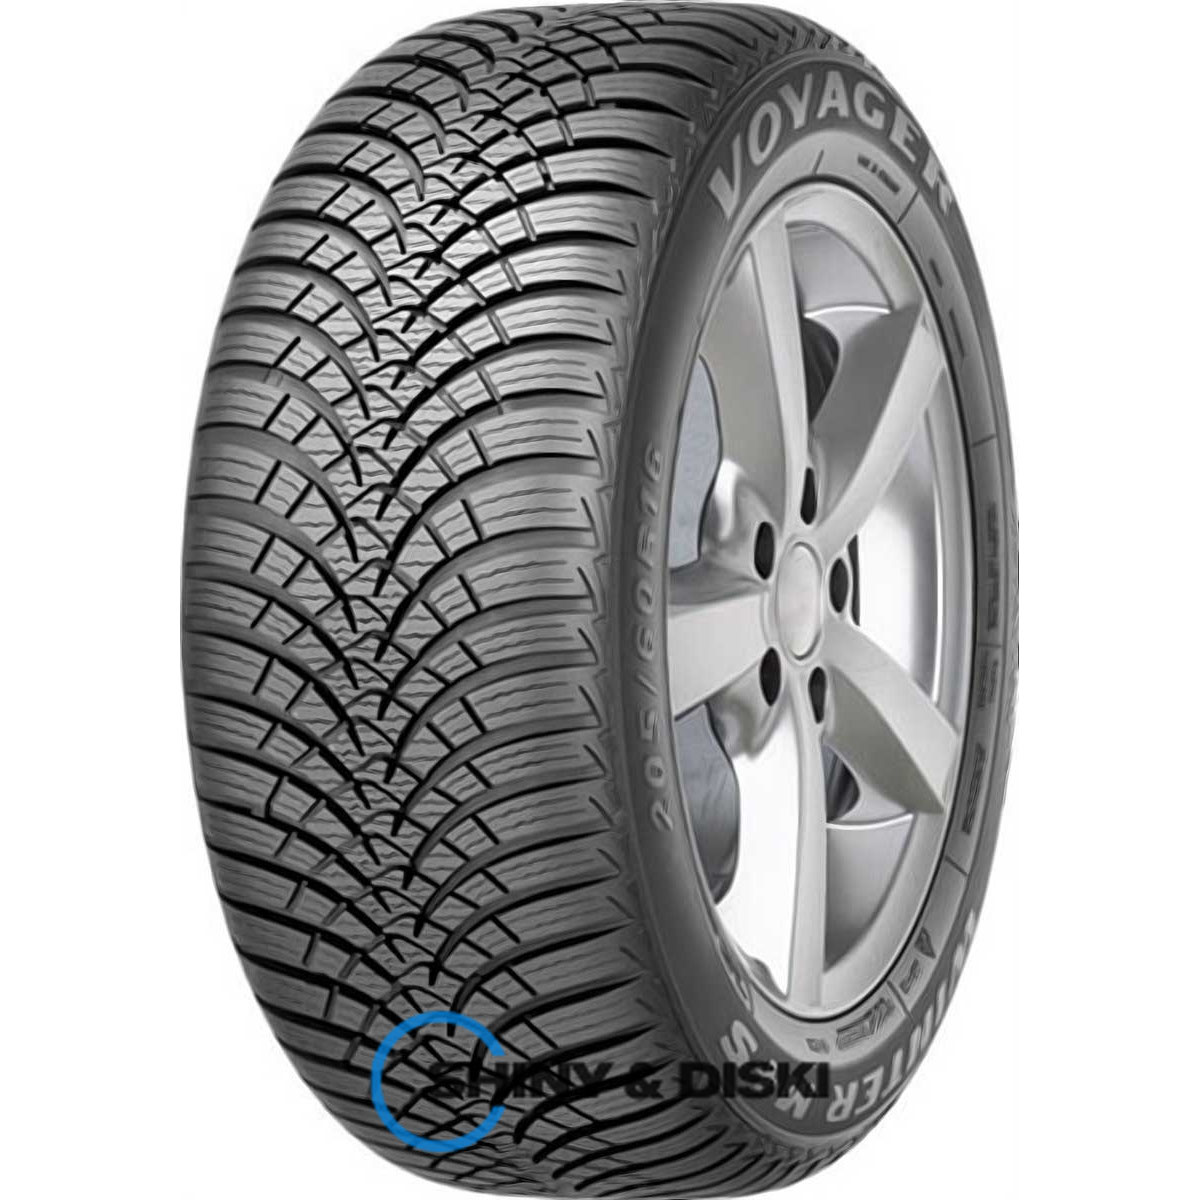 voyager winter 185/60 r15 84t